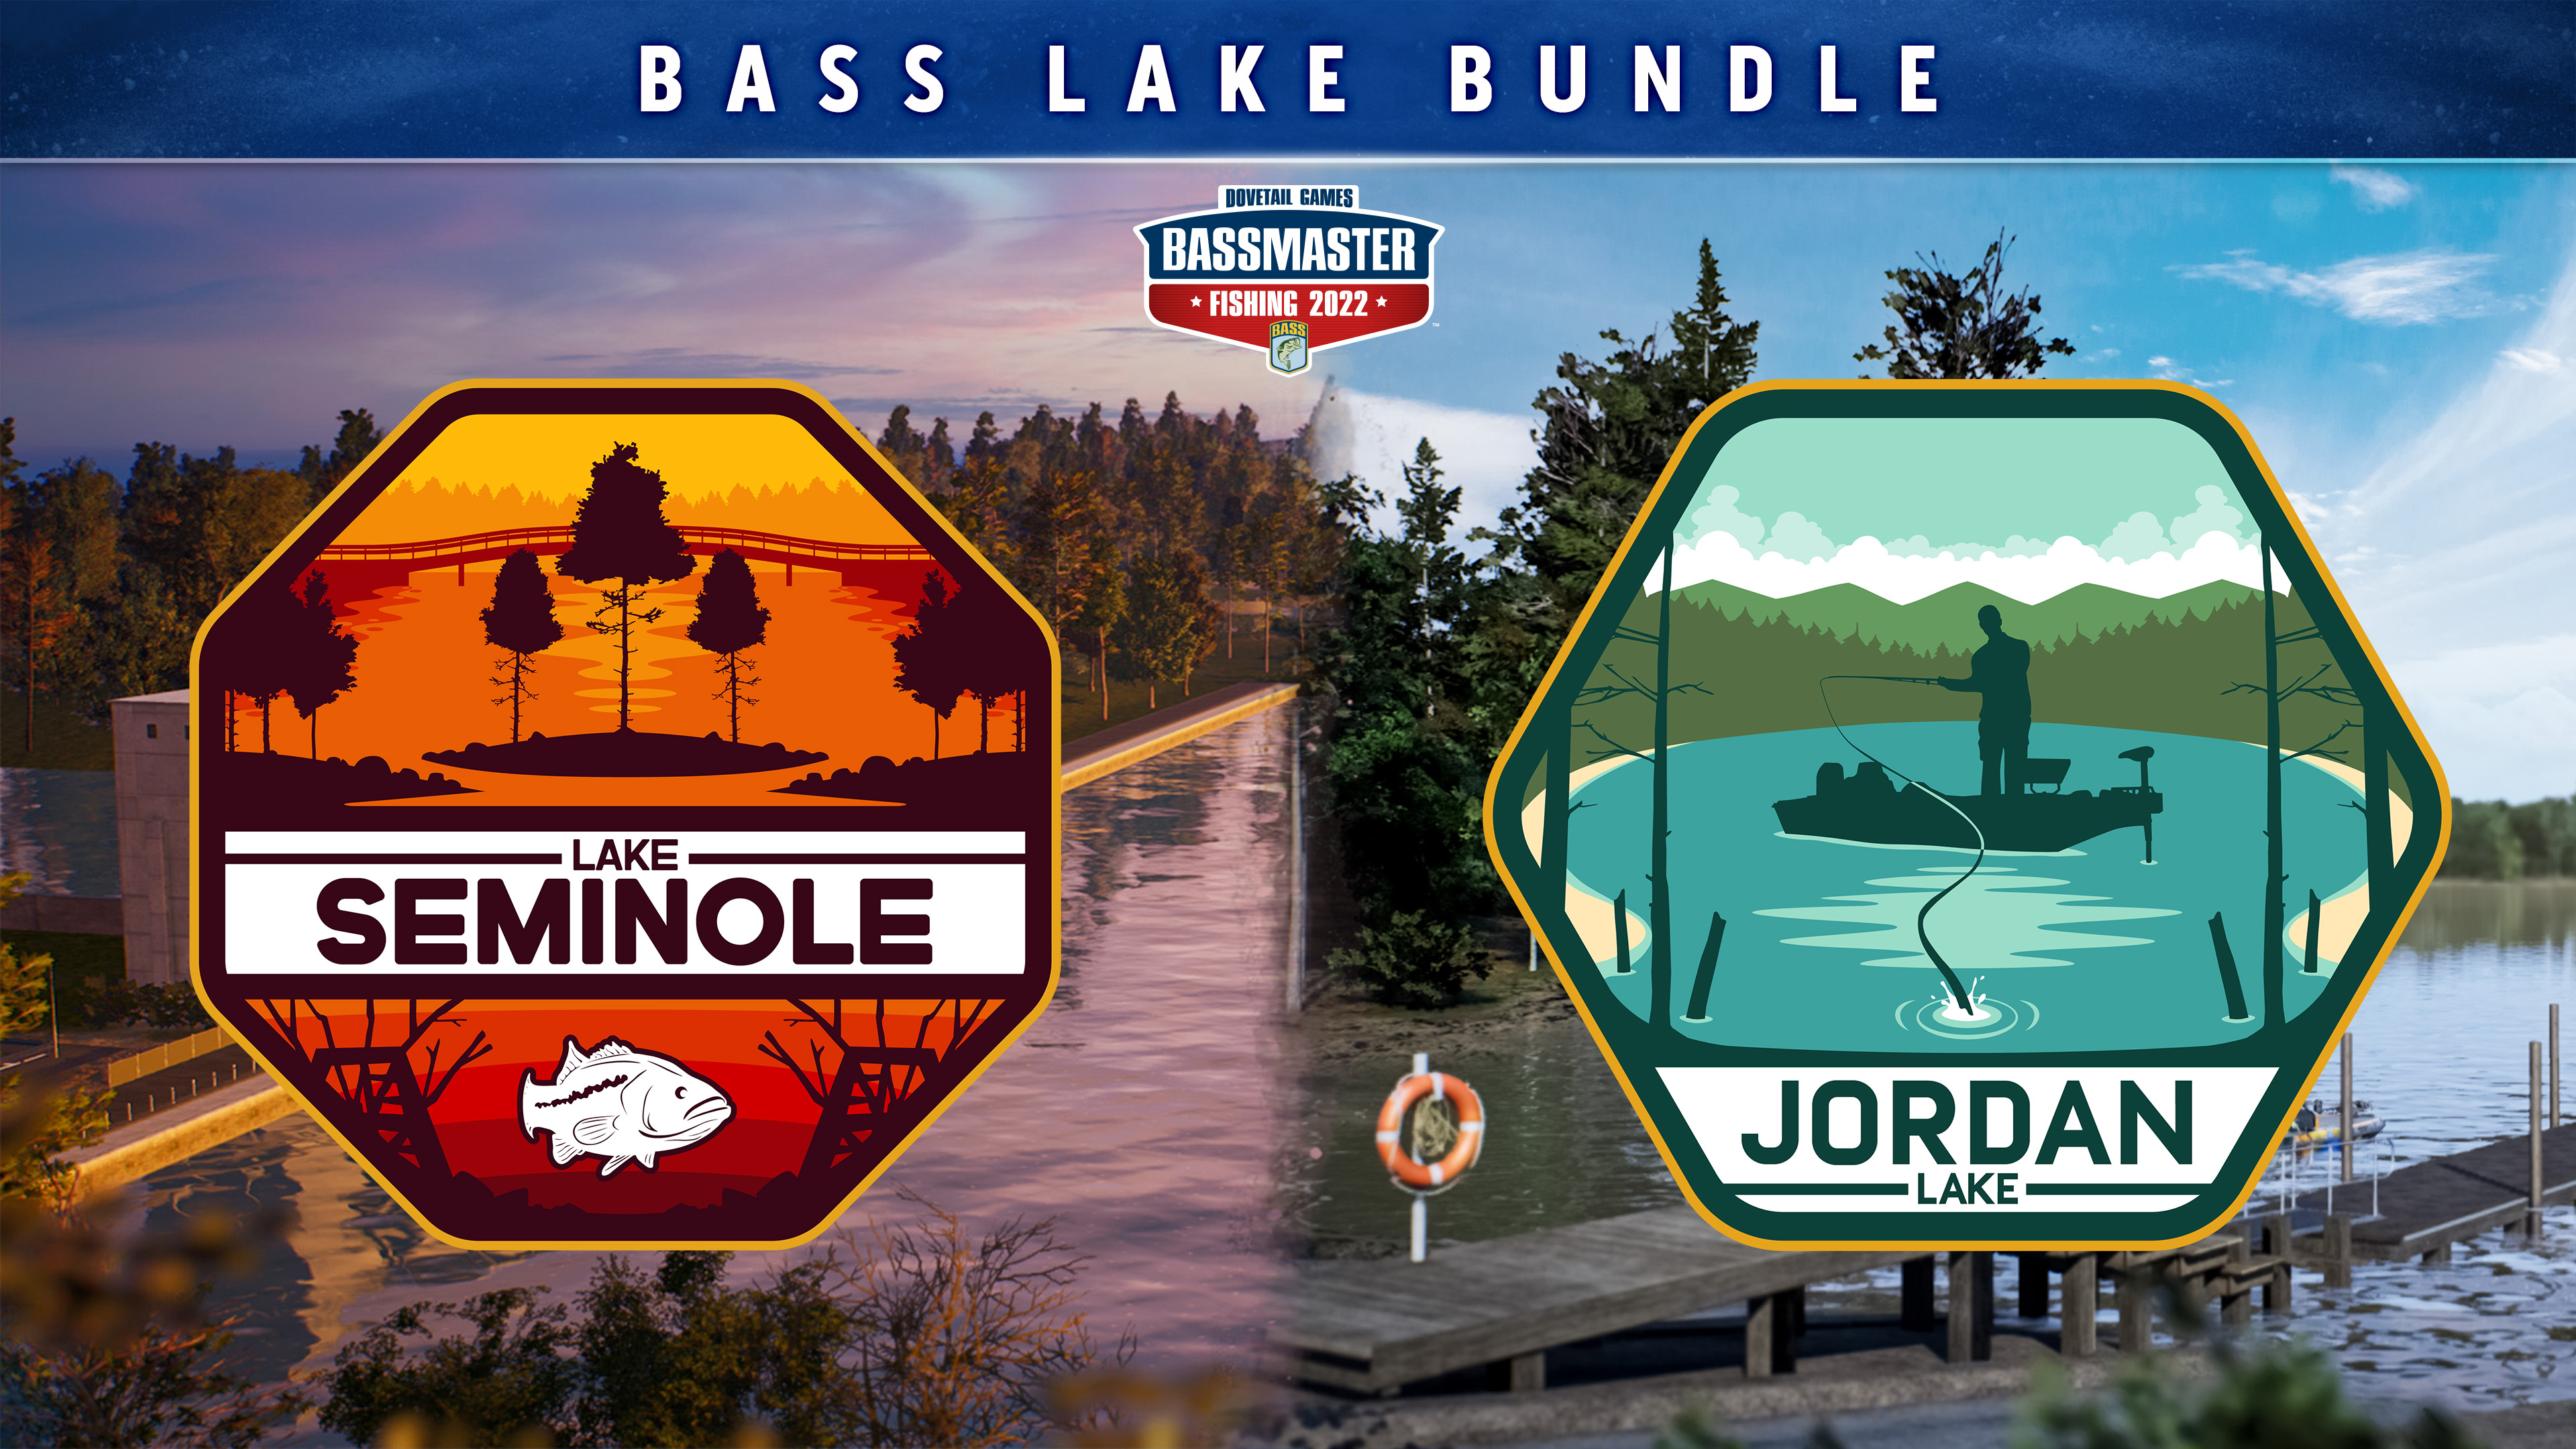 Land a - Bassmaster® Bass PR Available Lake Big \'Bass Basin ONE Bundle\' DLC, in 2022 Now Fishing the Studio